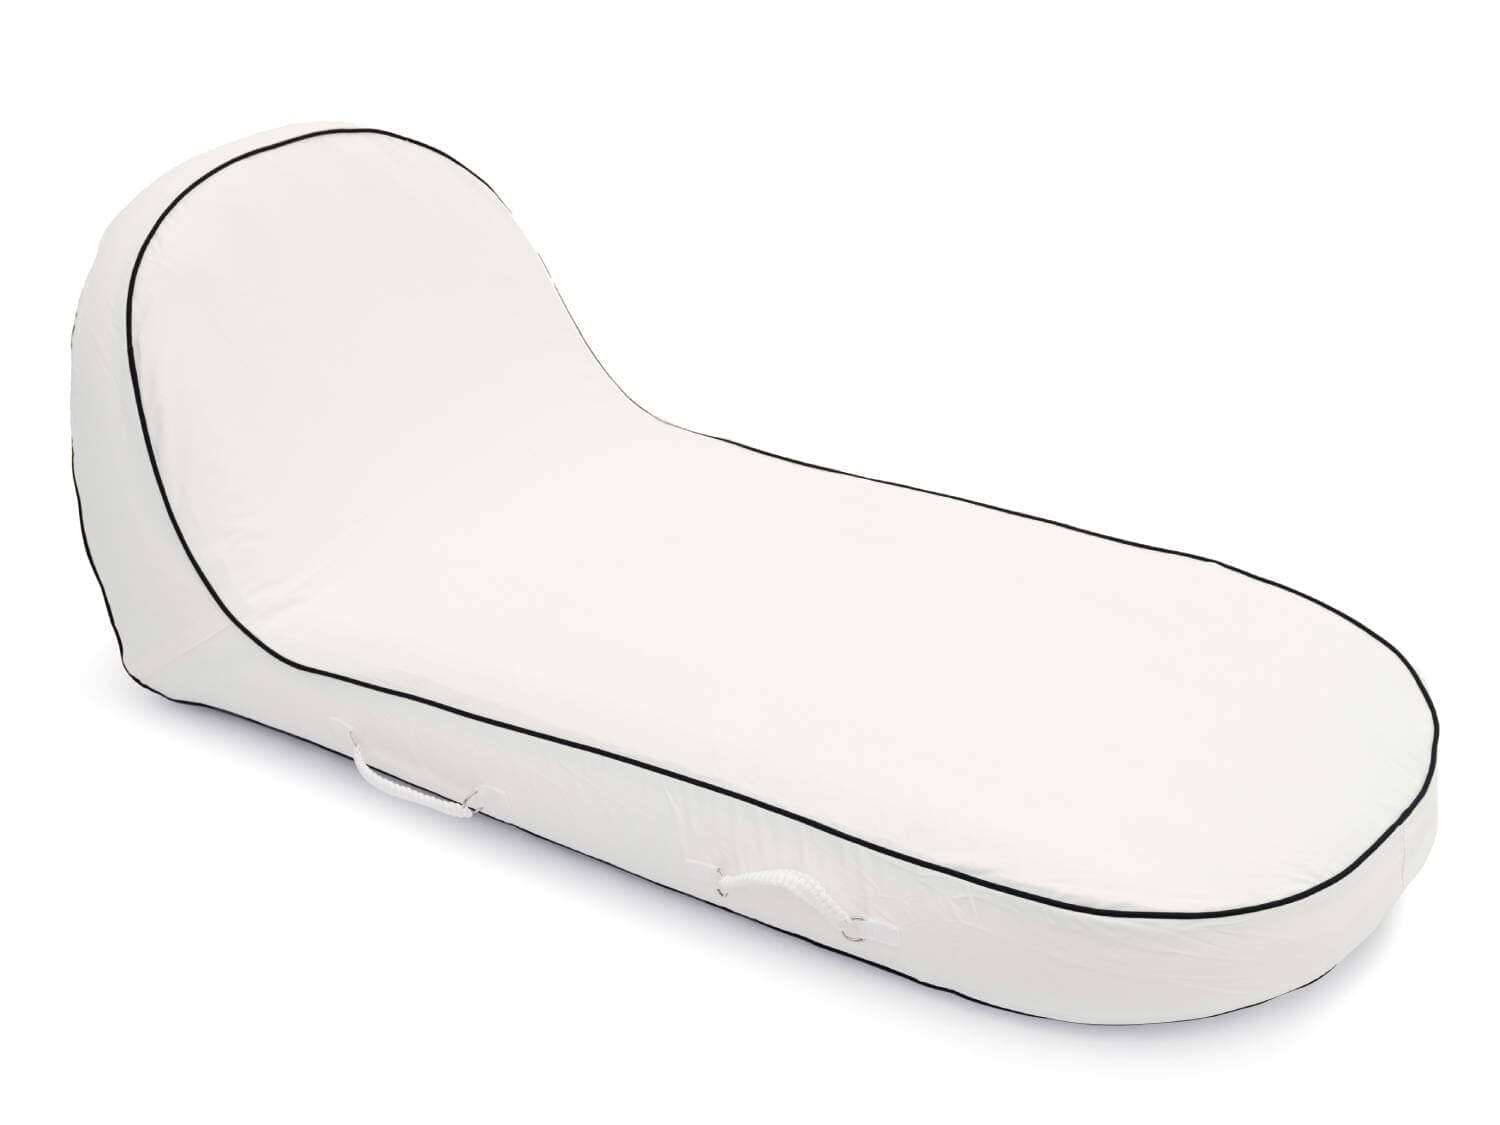 The Pool Lounger - Rivie White Pool Lounger Business & Pleasure Co Aus 